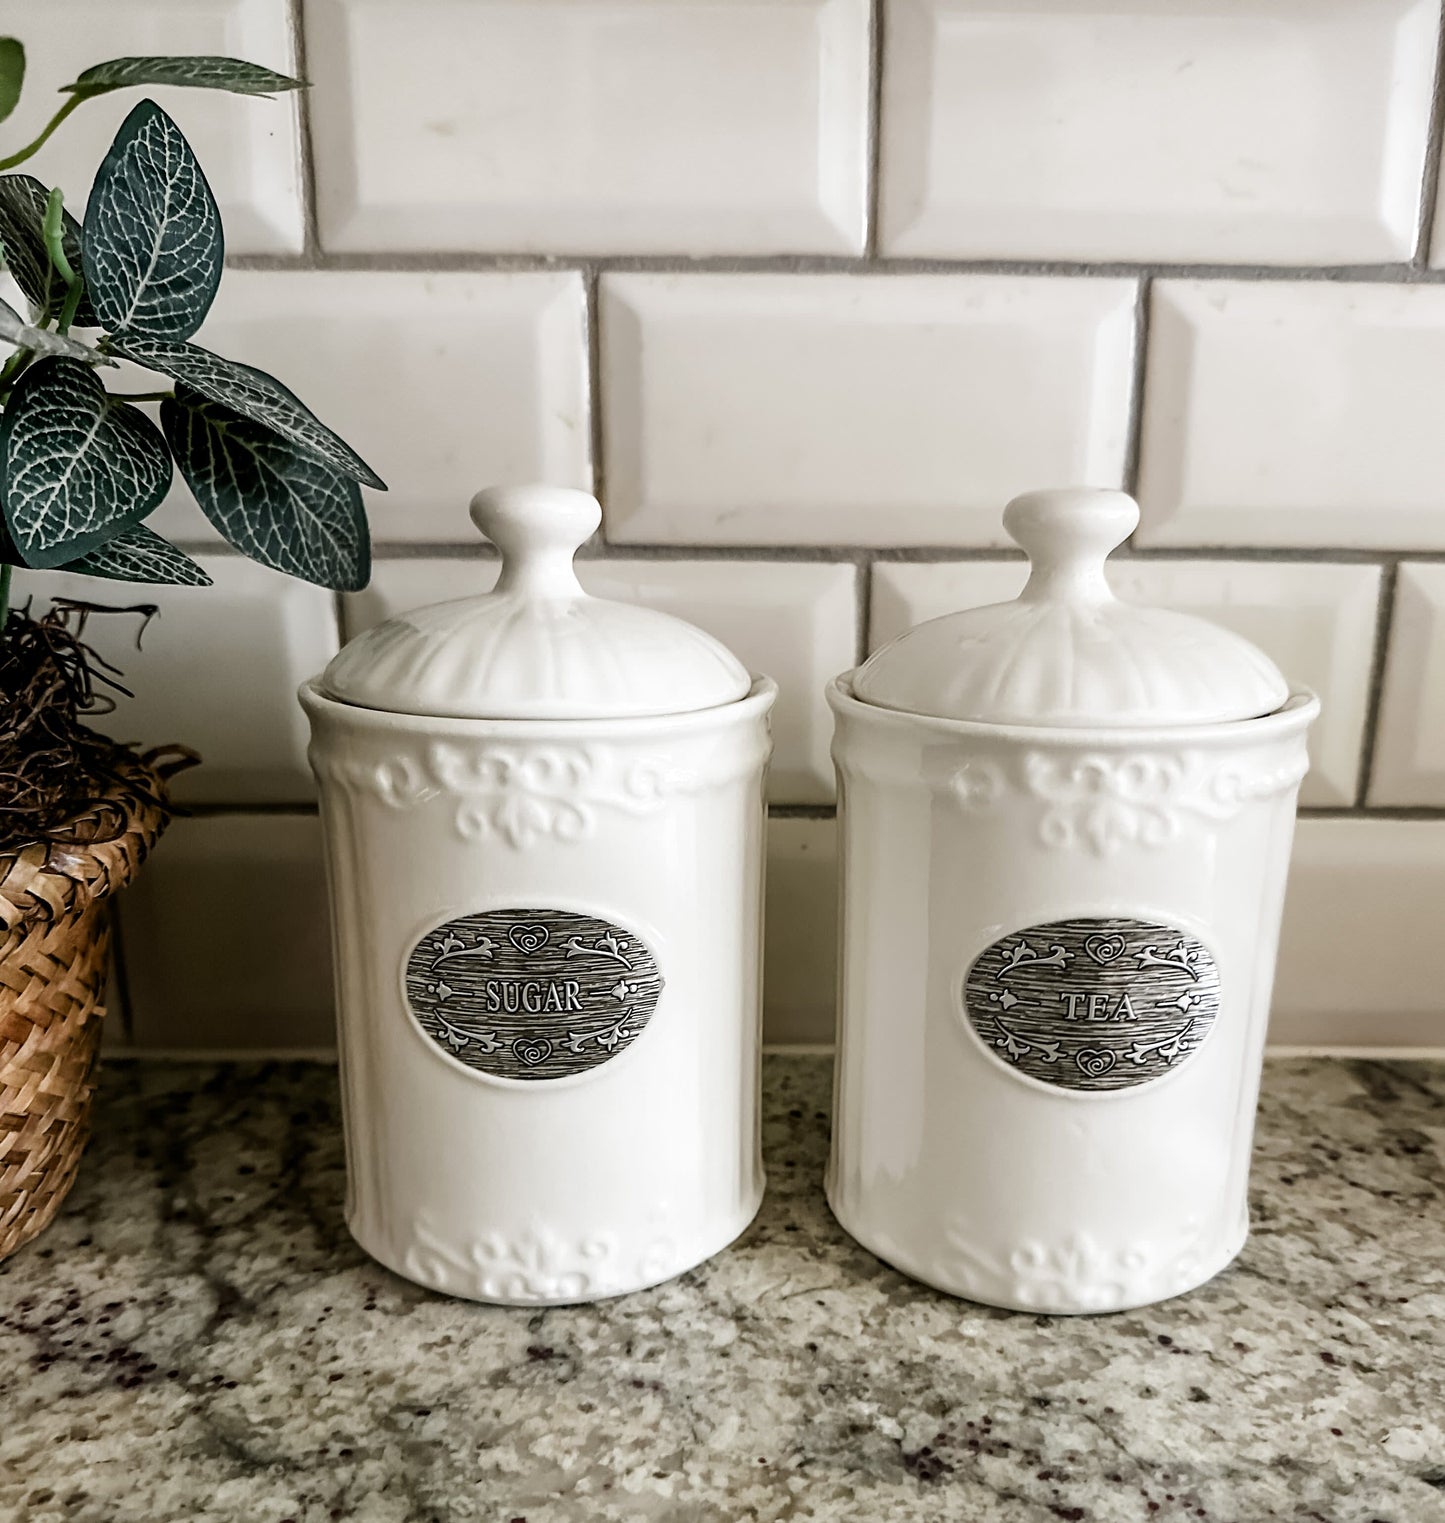 Sugar and tea canister set